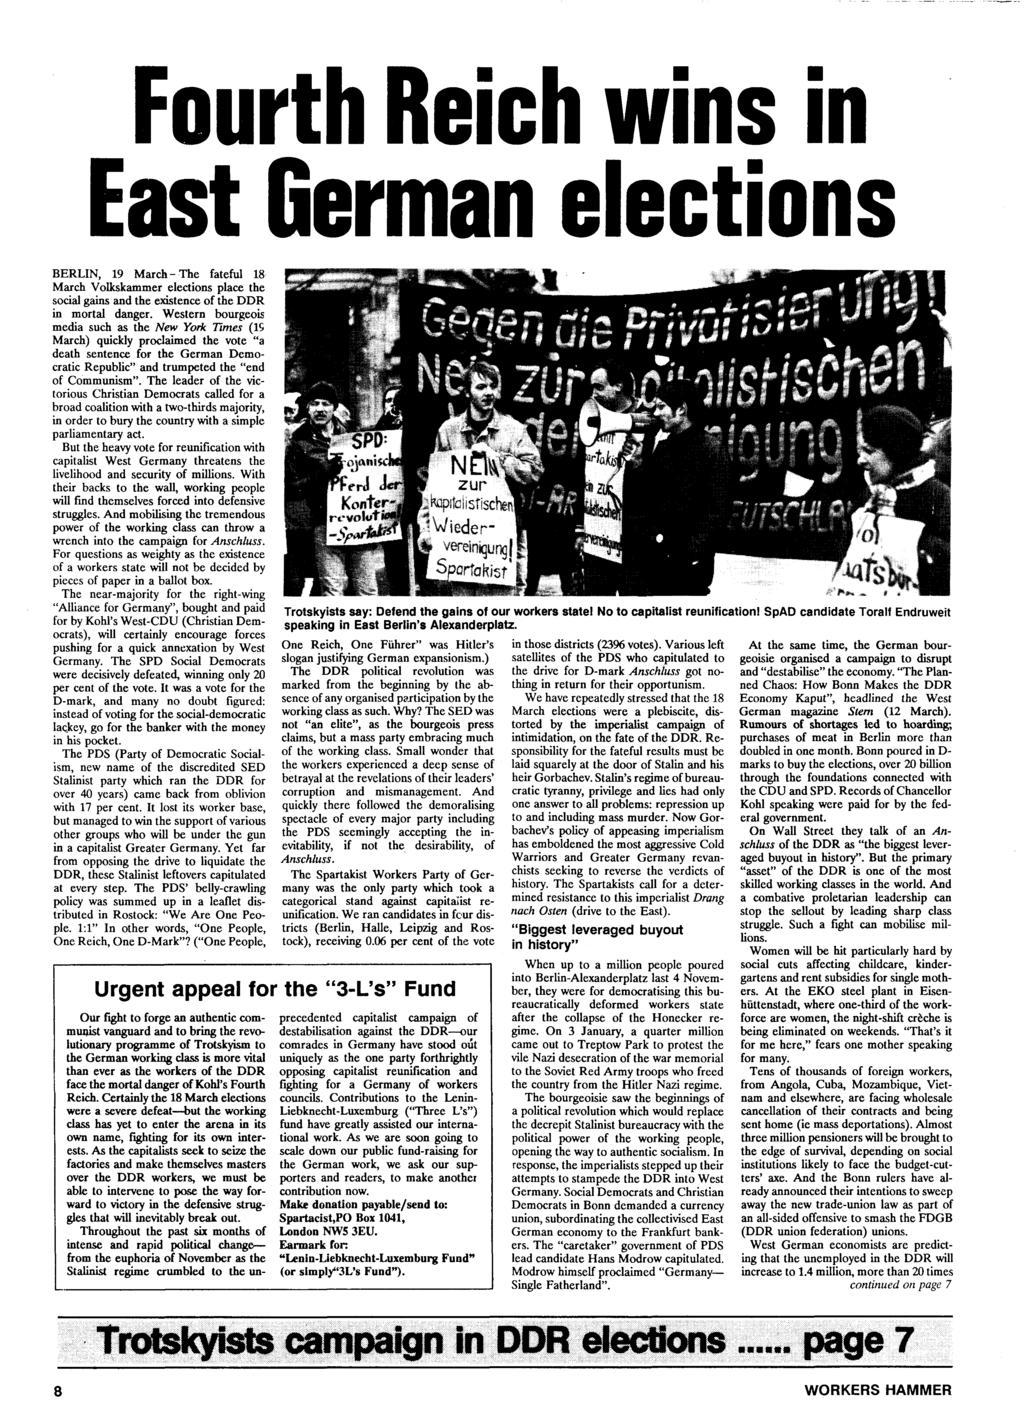 Fourth Reich wins in East German elections BERLIN, 19 March - The fateful 18 March Volkskammer elections place the social gains and the existence of the DDR in mortal danger.